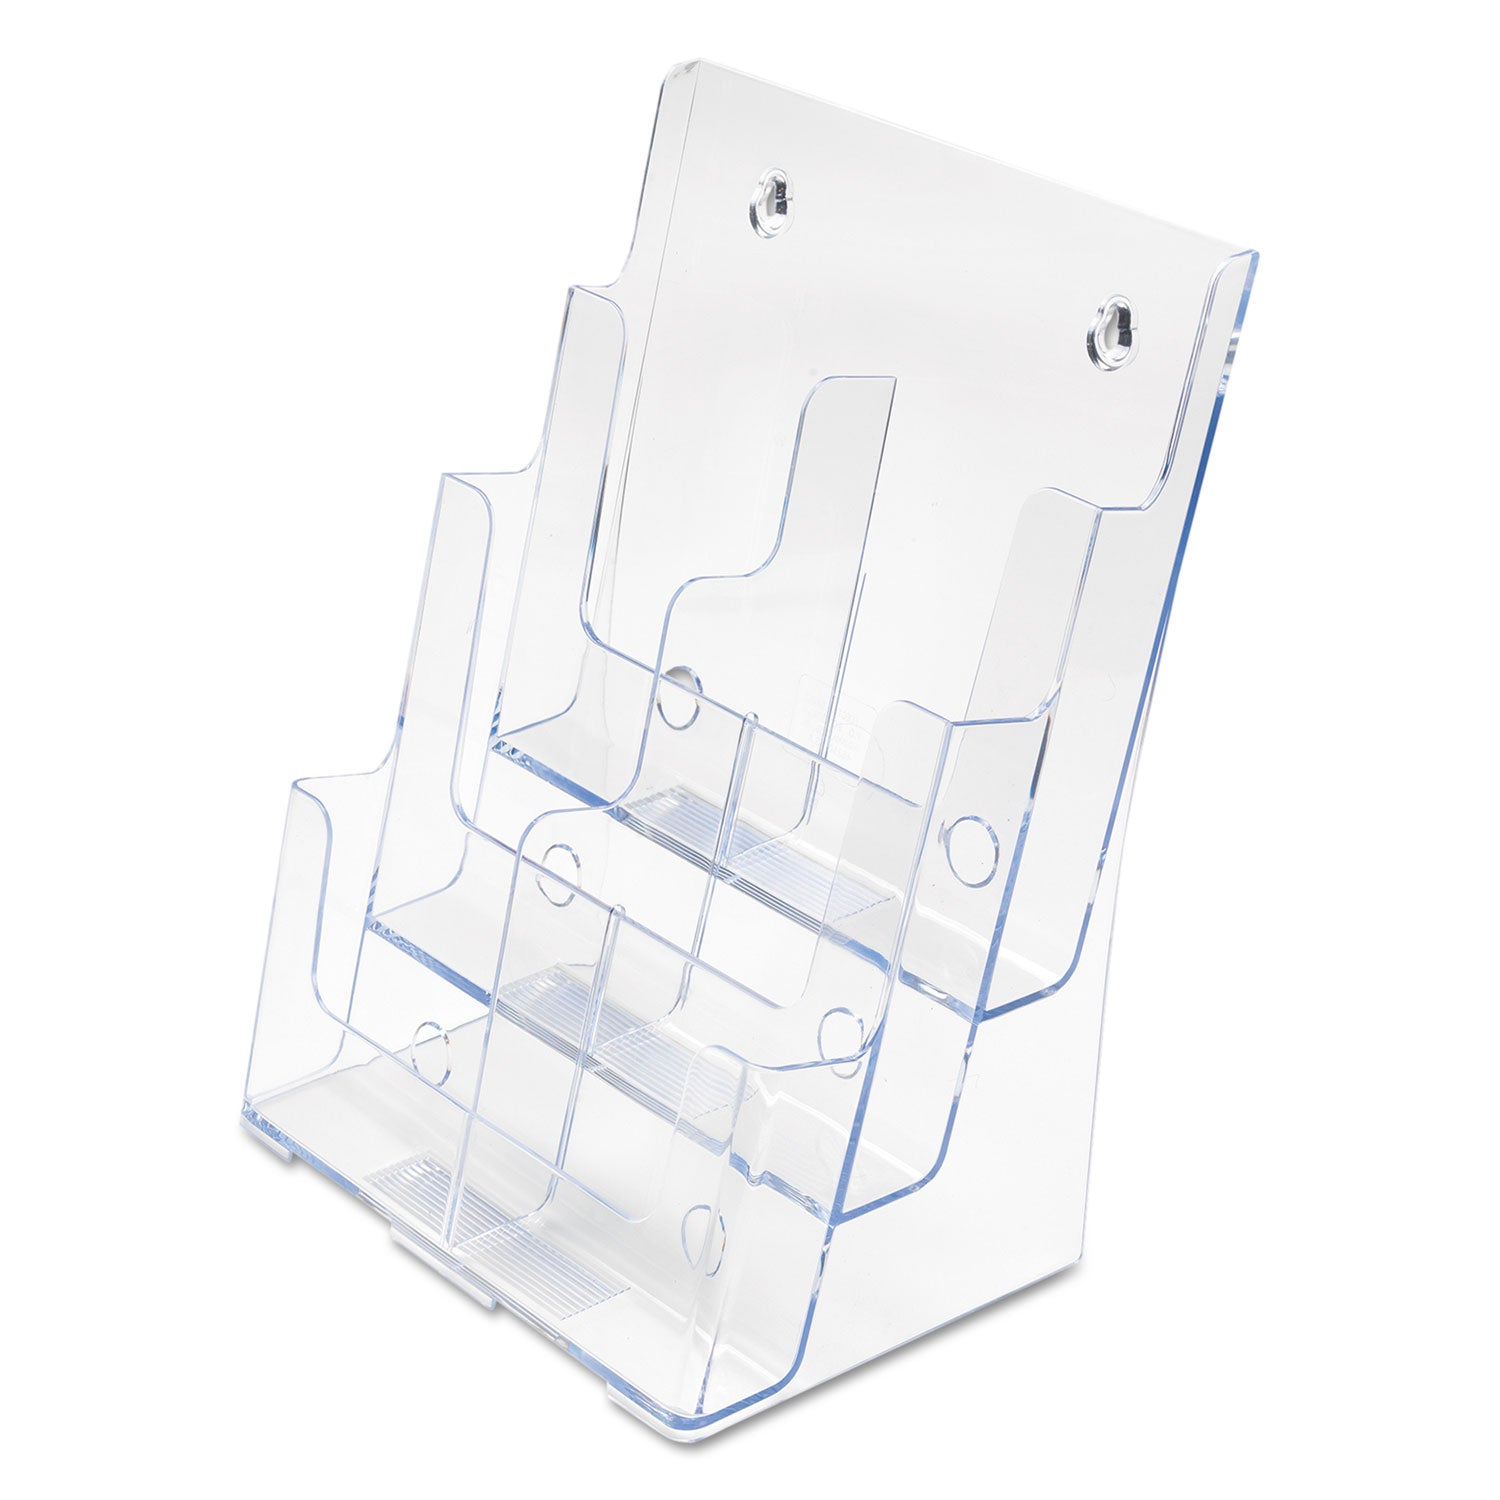 6-Compartment DocuHolder, Leaflet Size, 9.63w x 6.25d x 12.63h, Clear, Ships in 4-6 Business Days - 